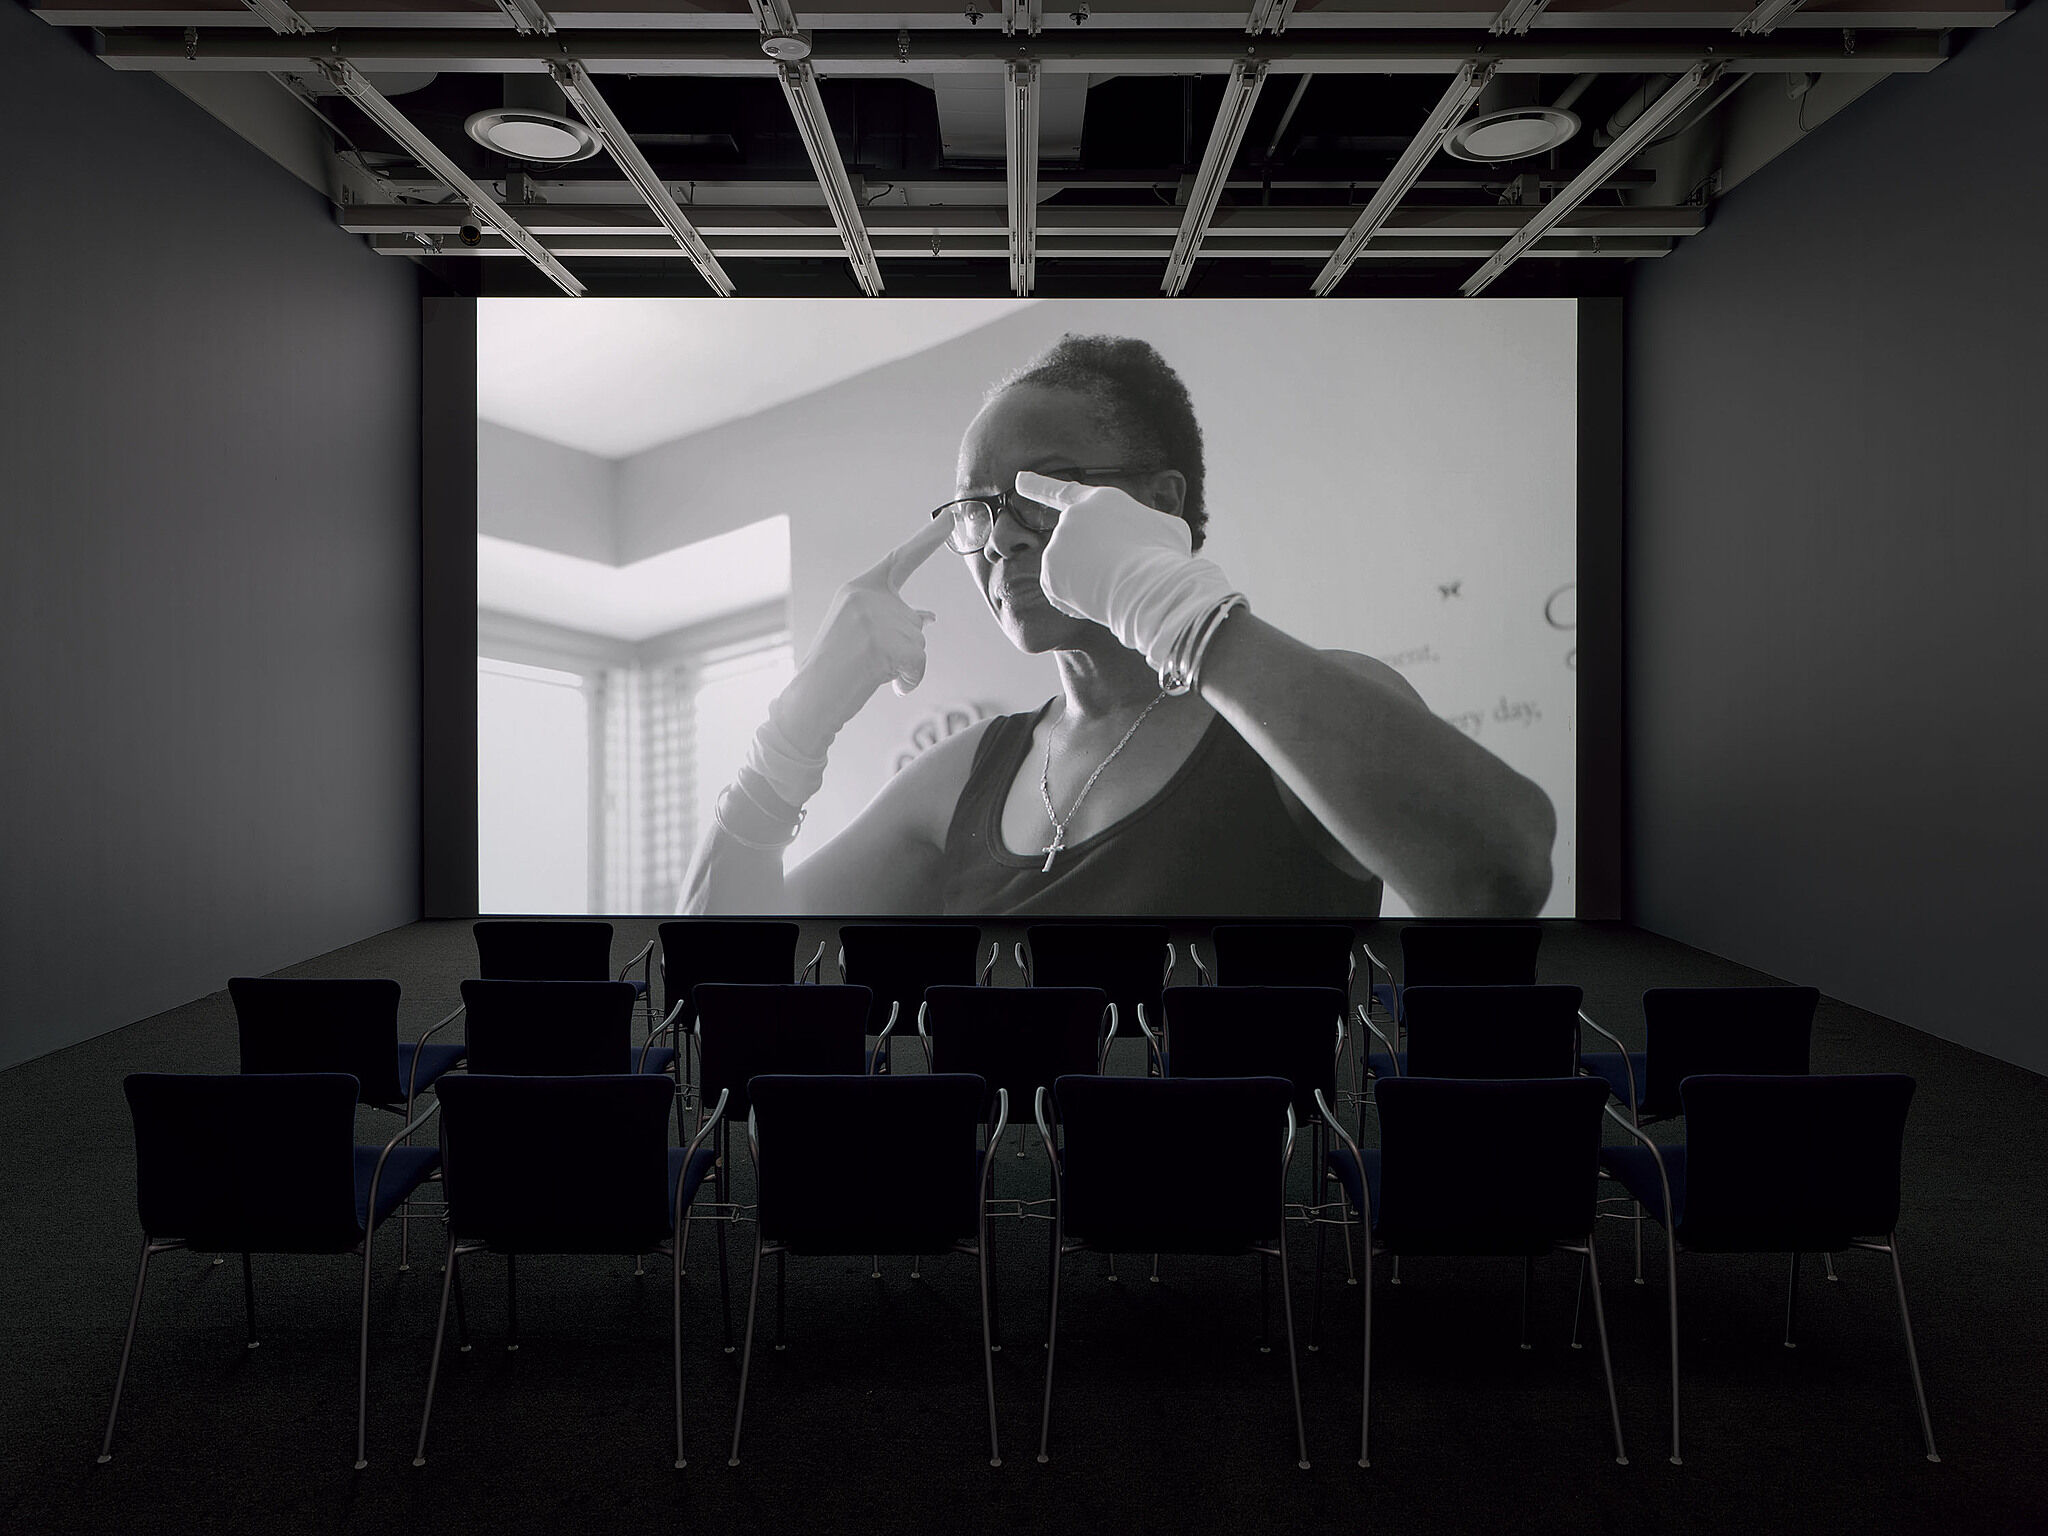 An installation view of a video projection in a gallery.